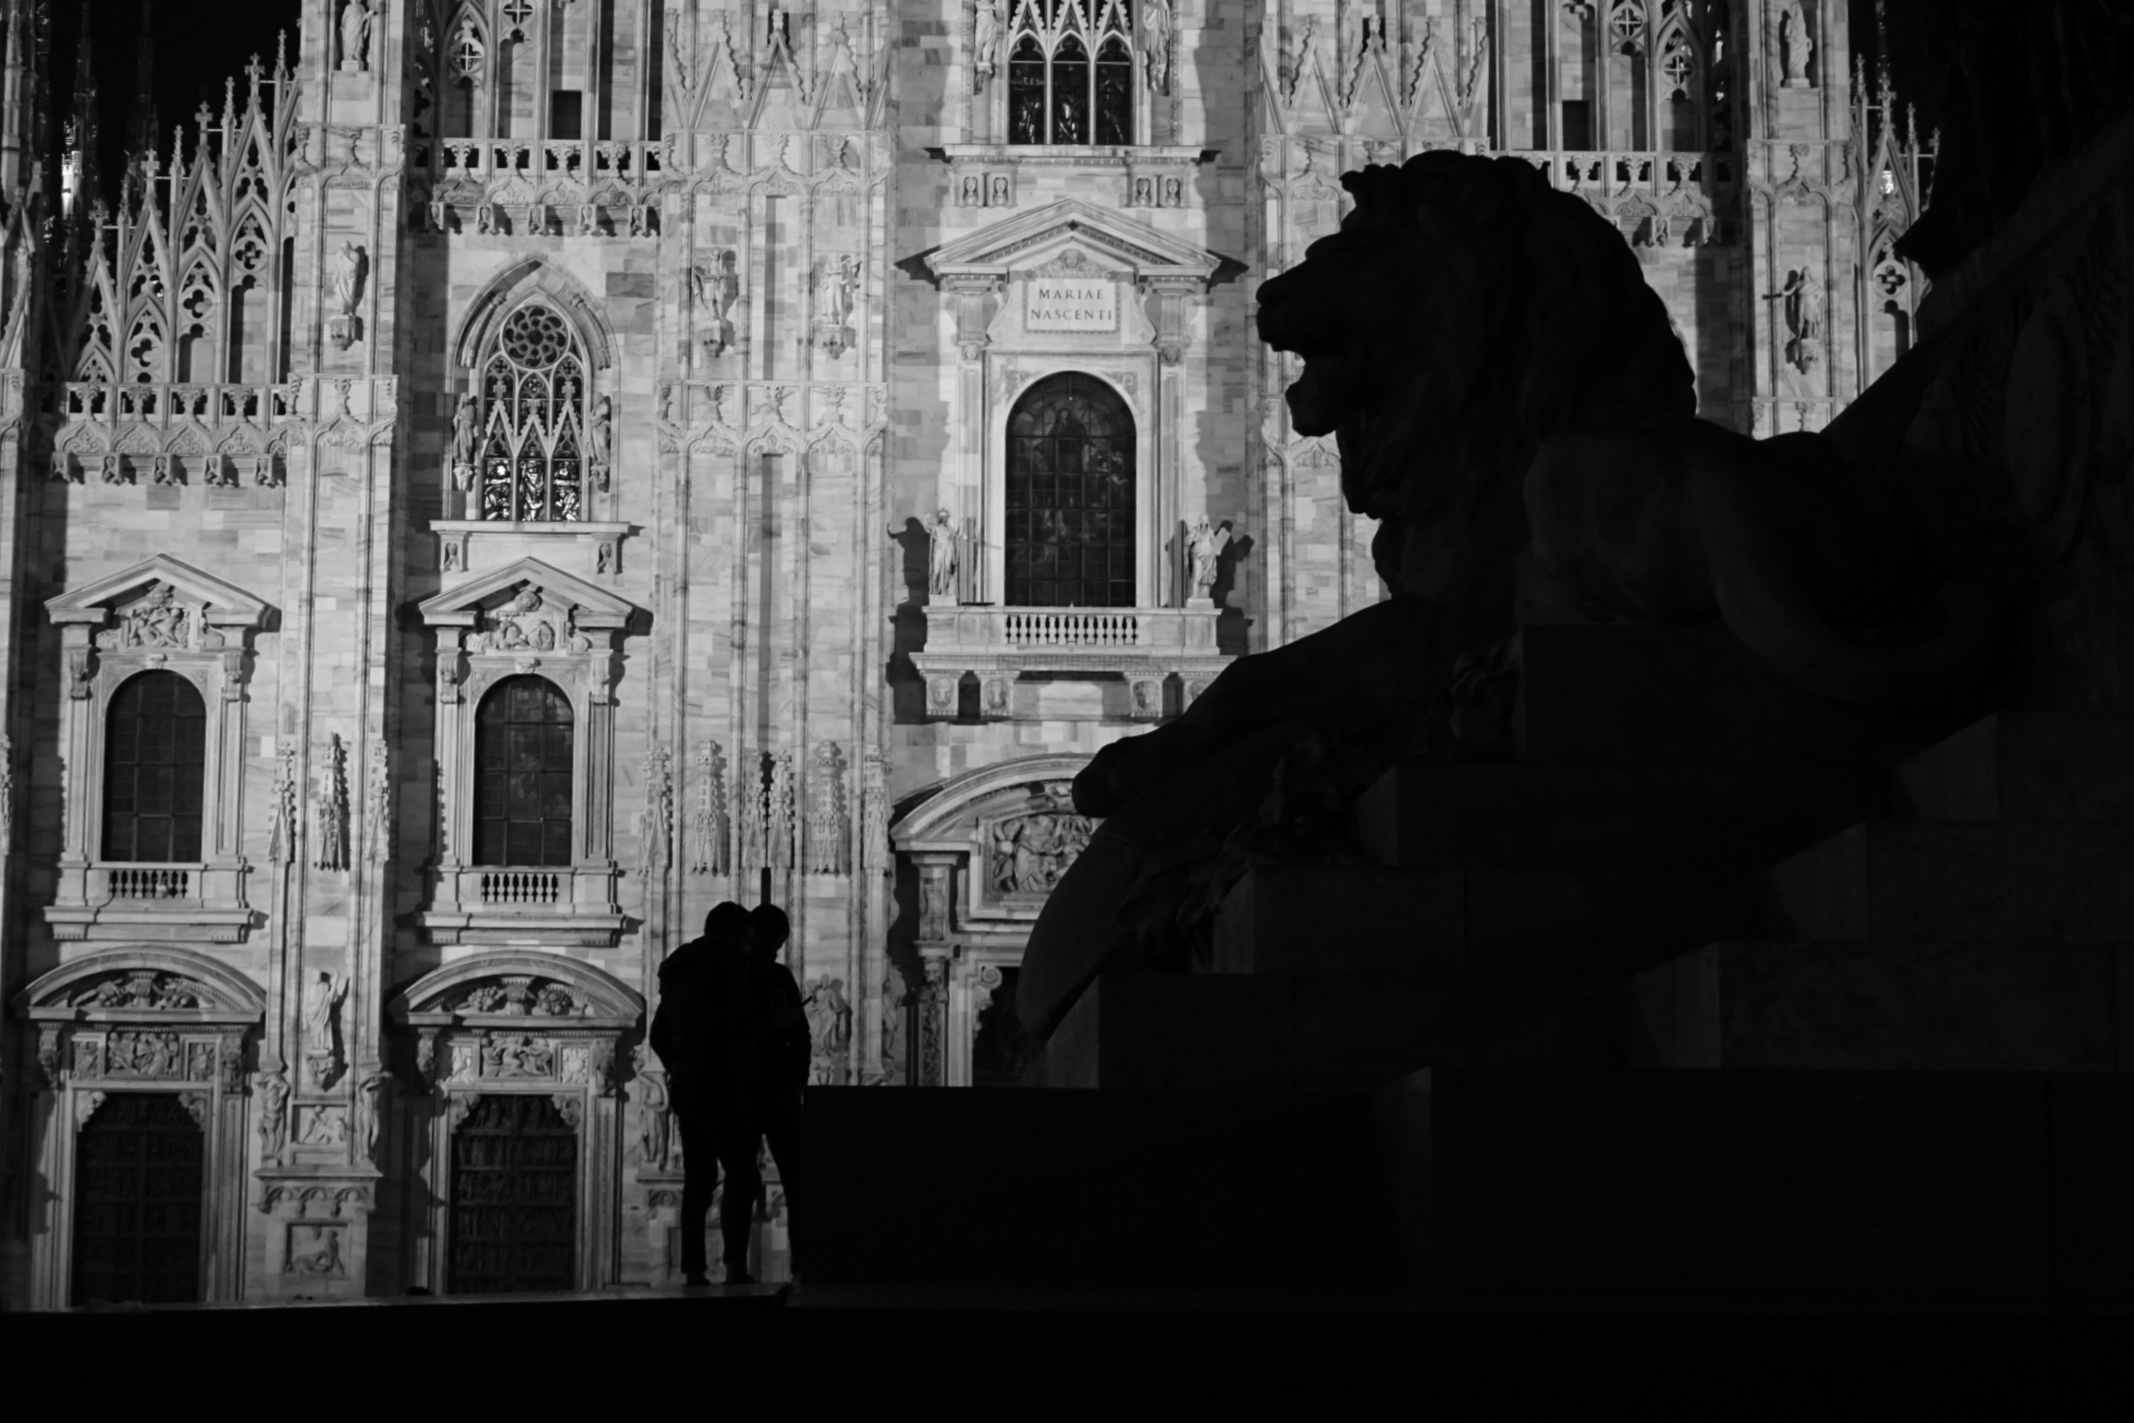 Lion in Piazza Duomo ...